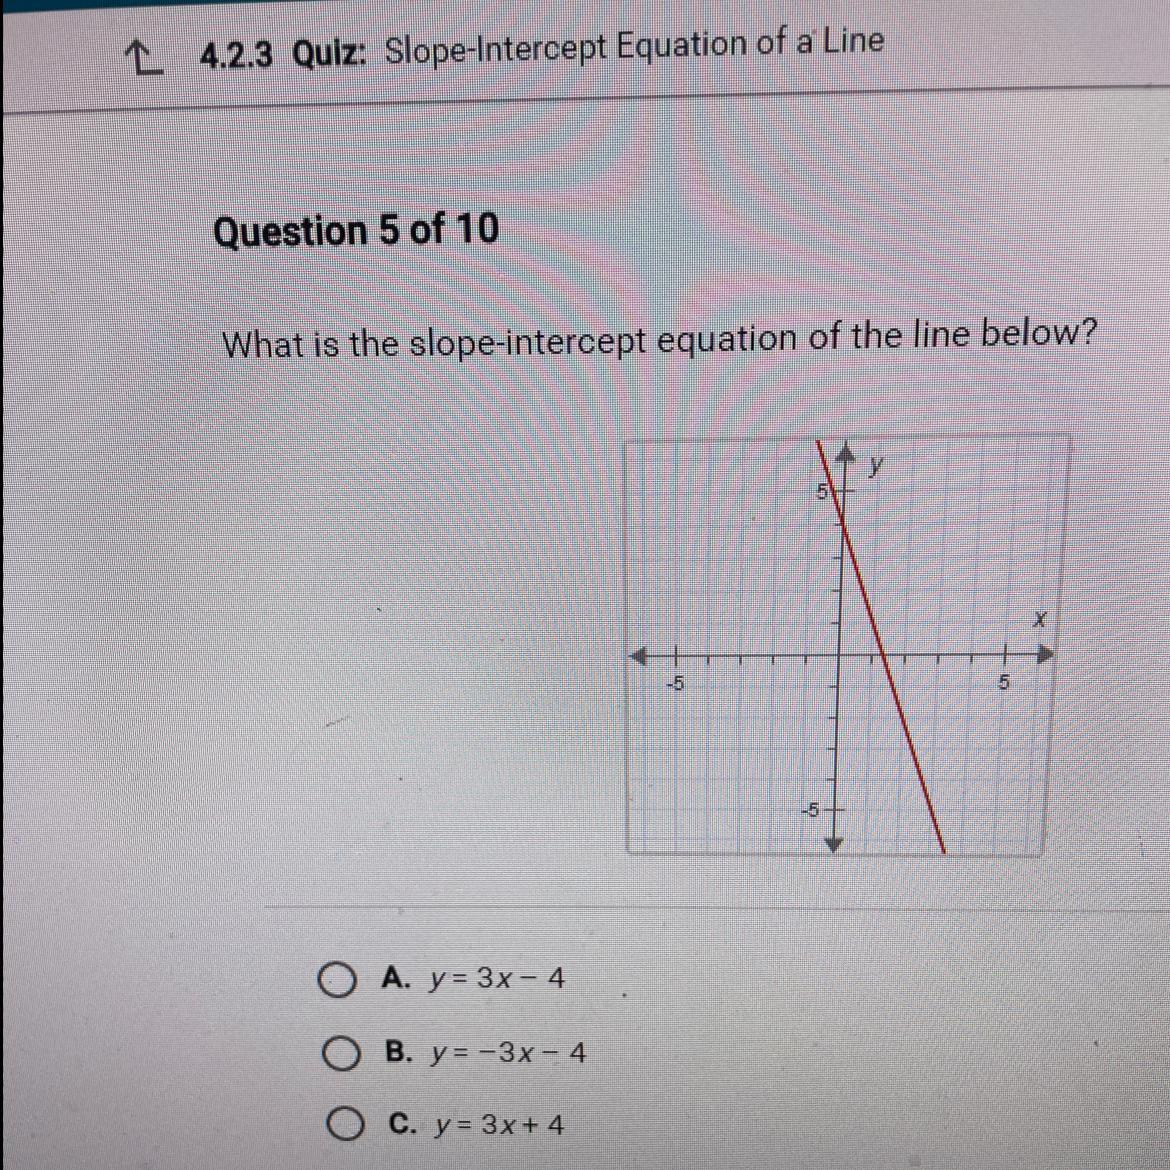 What Is The Slope-intercept Equation Of The Line Below?